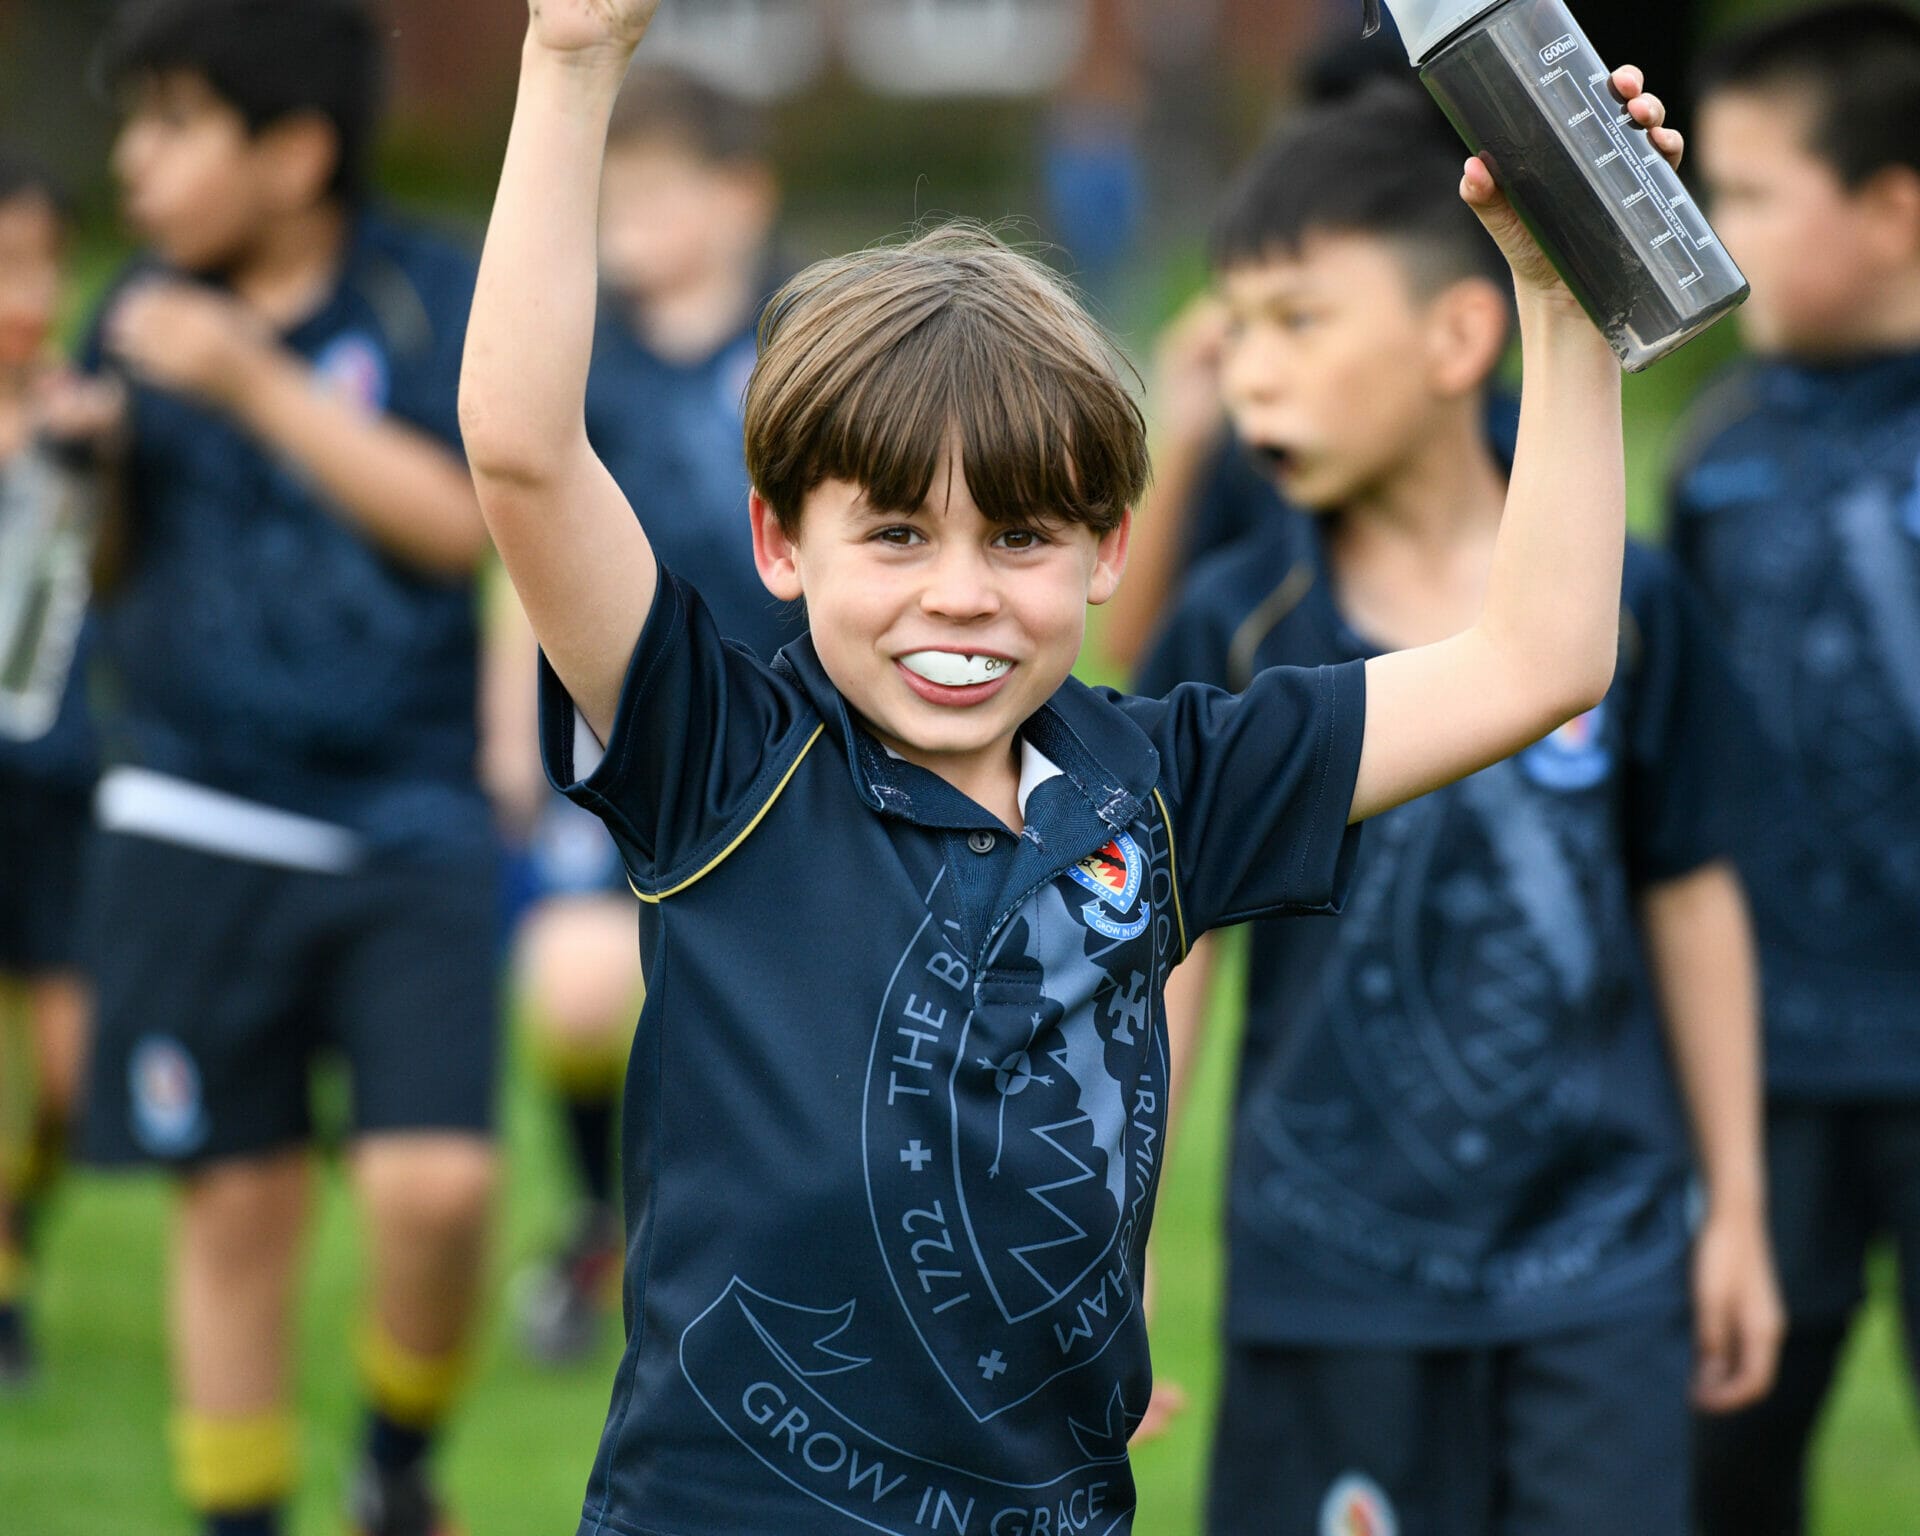 A young boy celebrates after a successful rugby fixture.